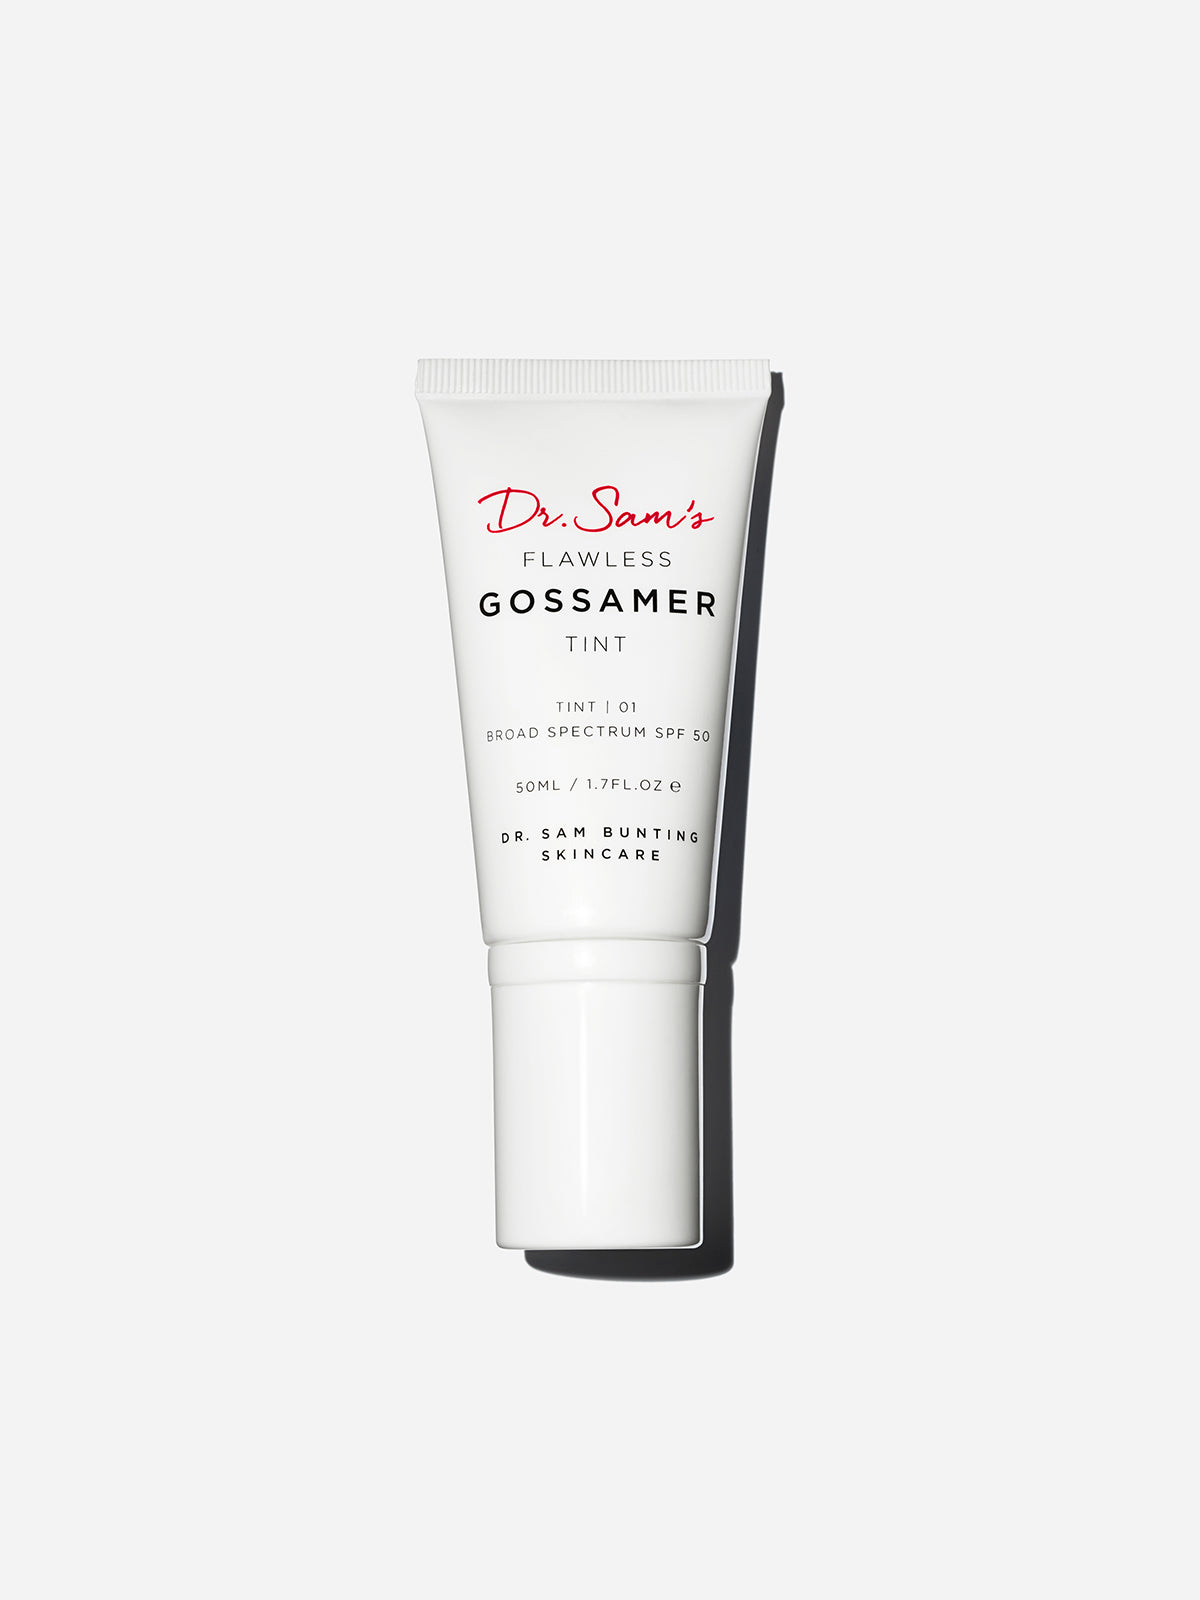 Dr Sam's Flawless Gossamer Tinted SPF in Tint 01, suitable for Fair or pale skin usually with freckles, often burns, rarely tans.